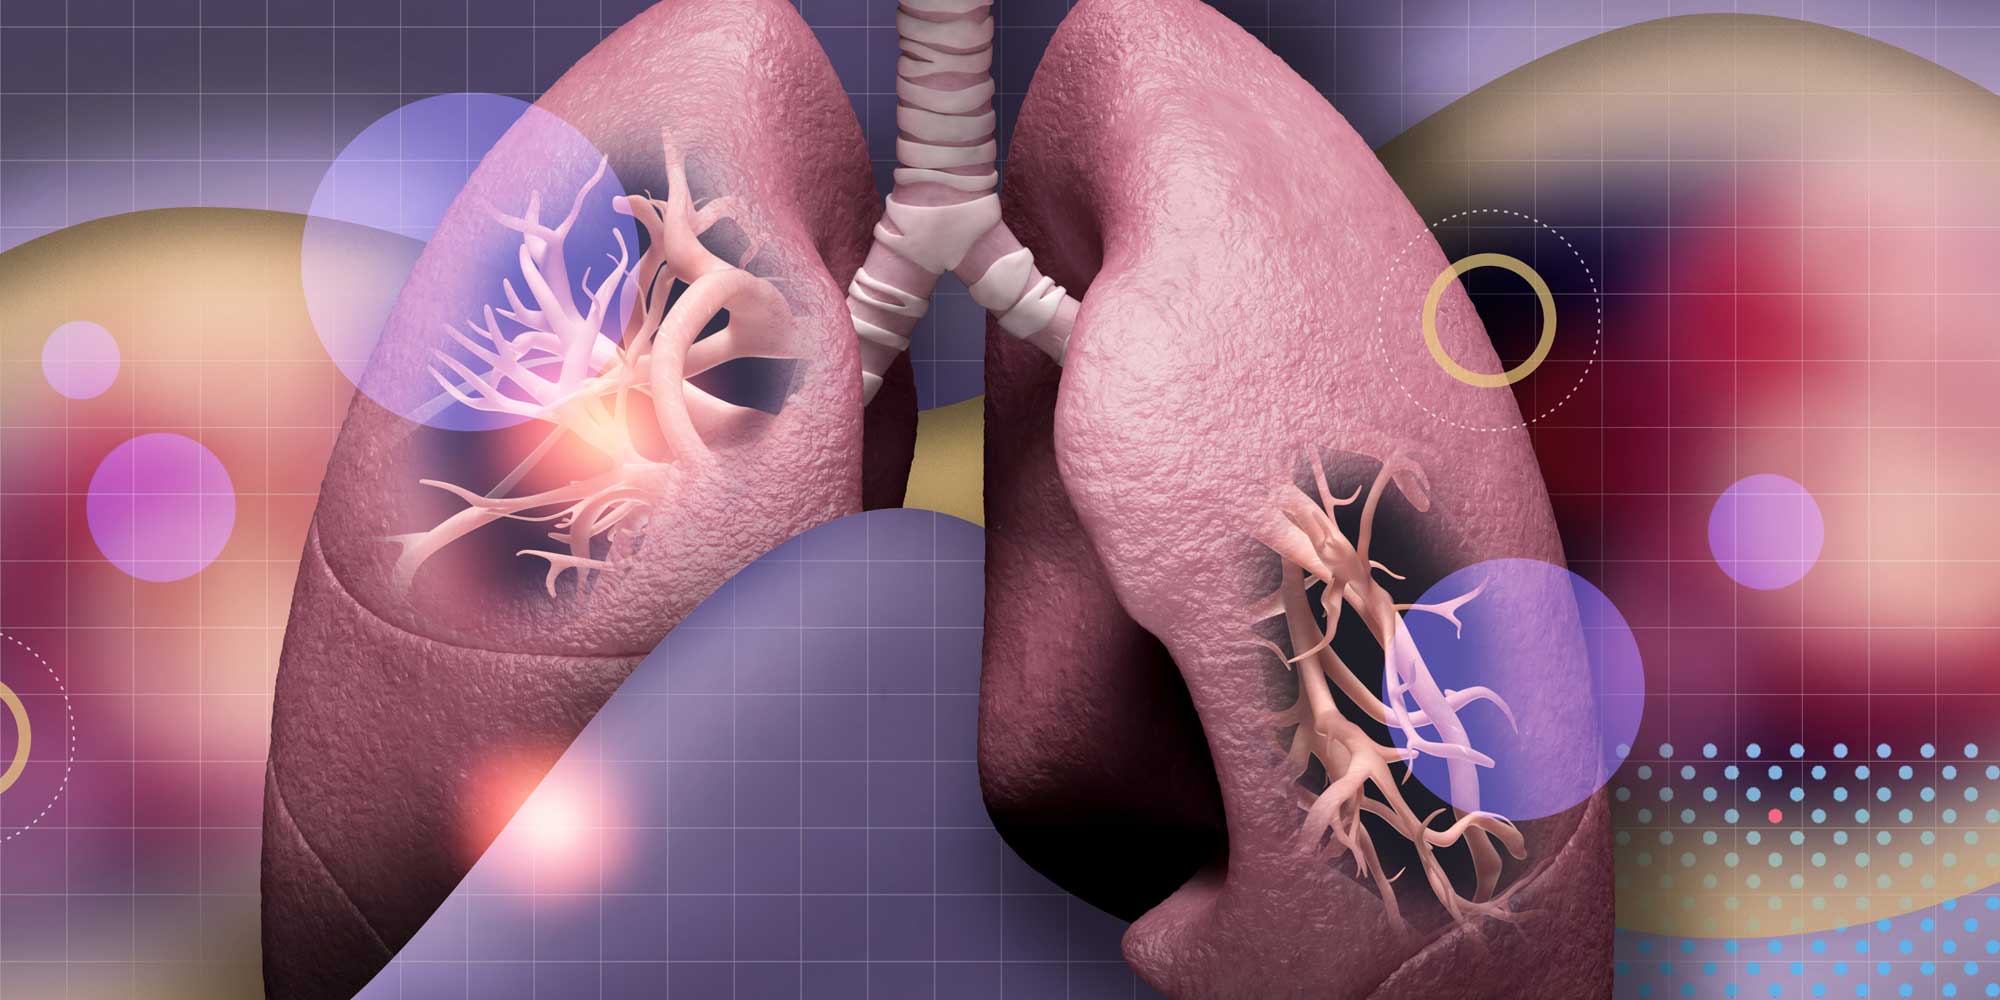 Immunotherapy Drug Is Well Tolerated in Lung Cancer Patients with Limited Physical Function